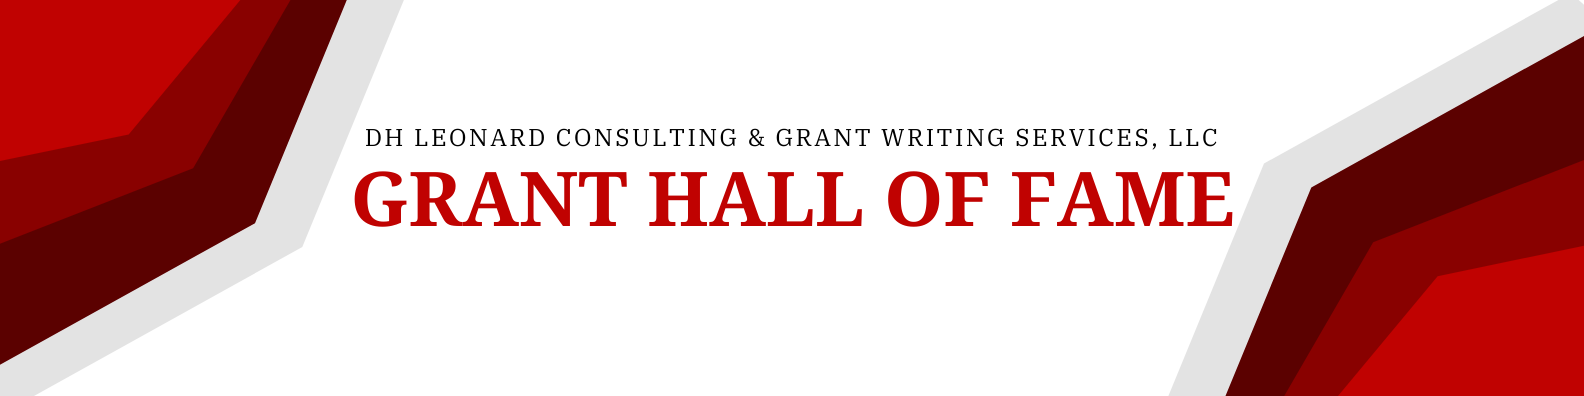 Grant Hall of Fame